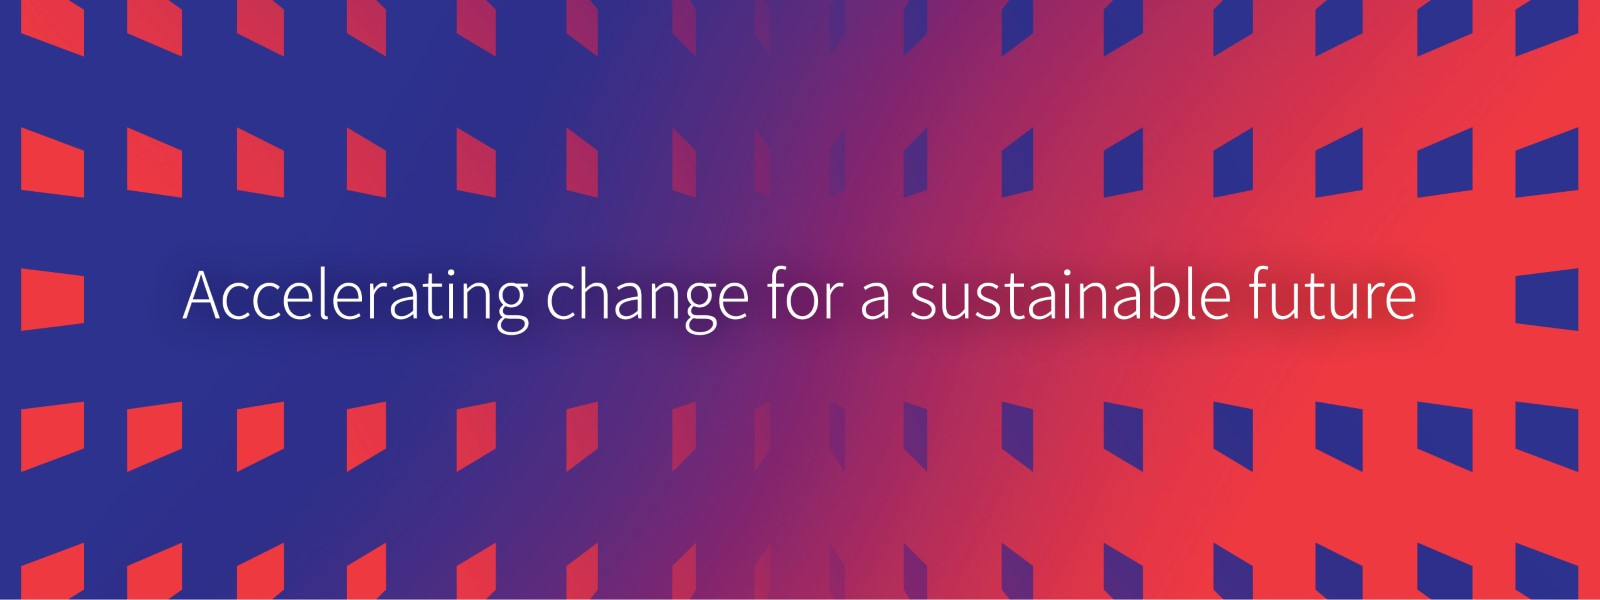 Accelerating change for a sustainable future